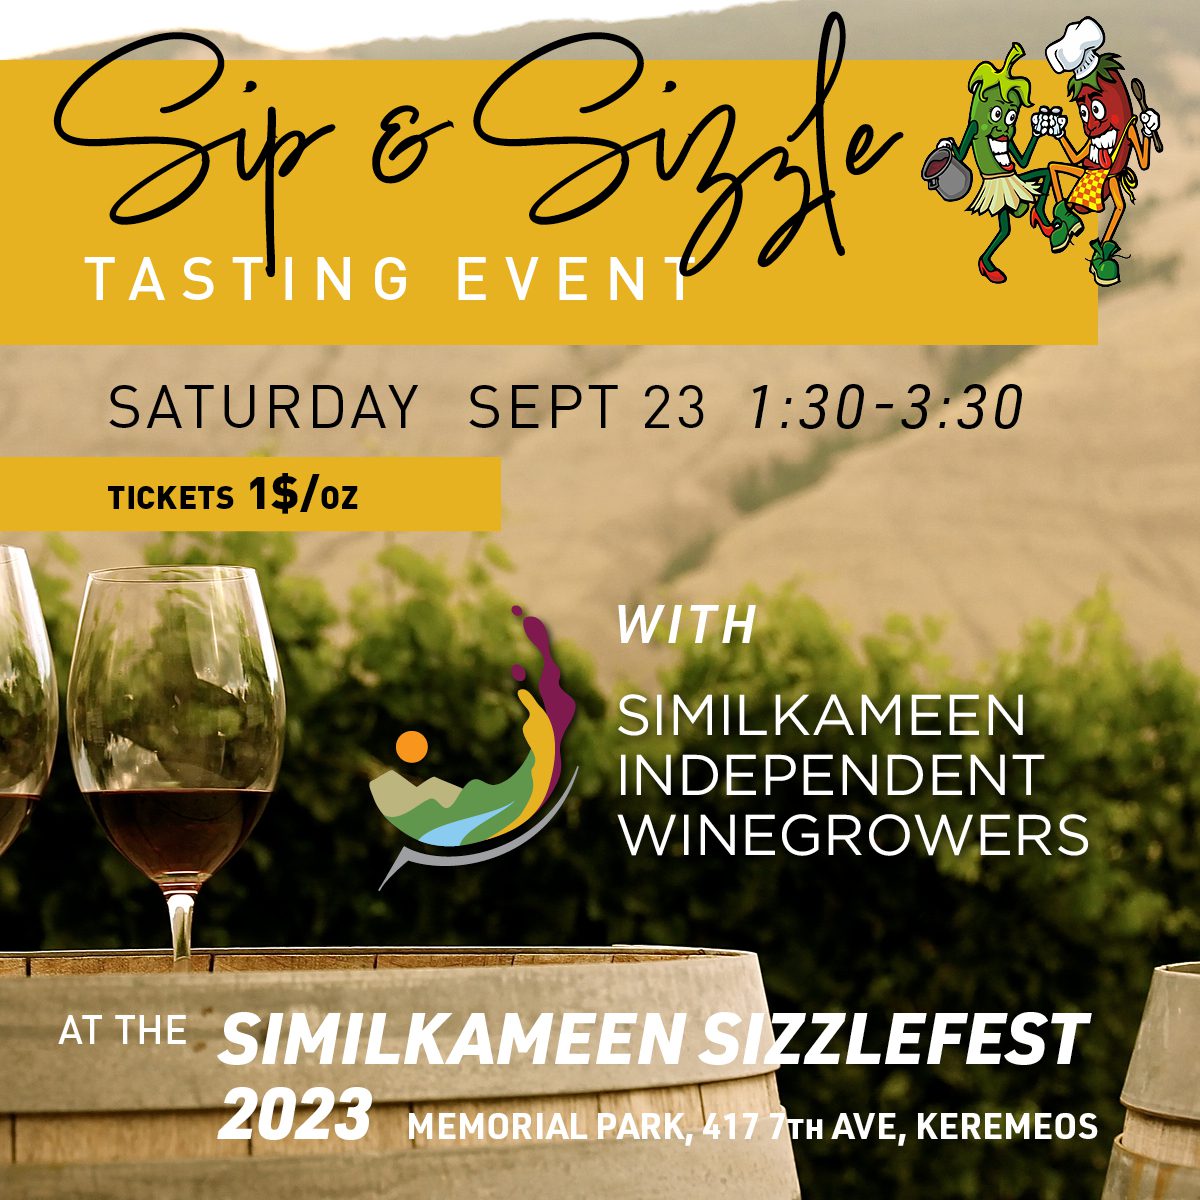 Sip & Sizzle tasting event poster